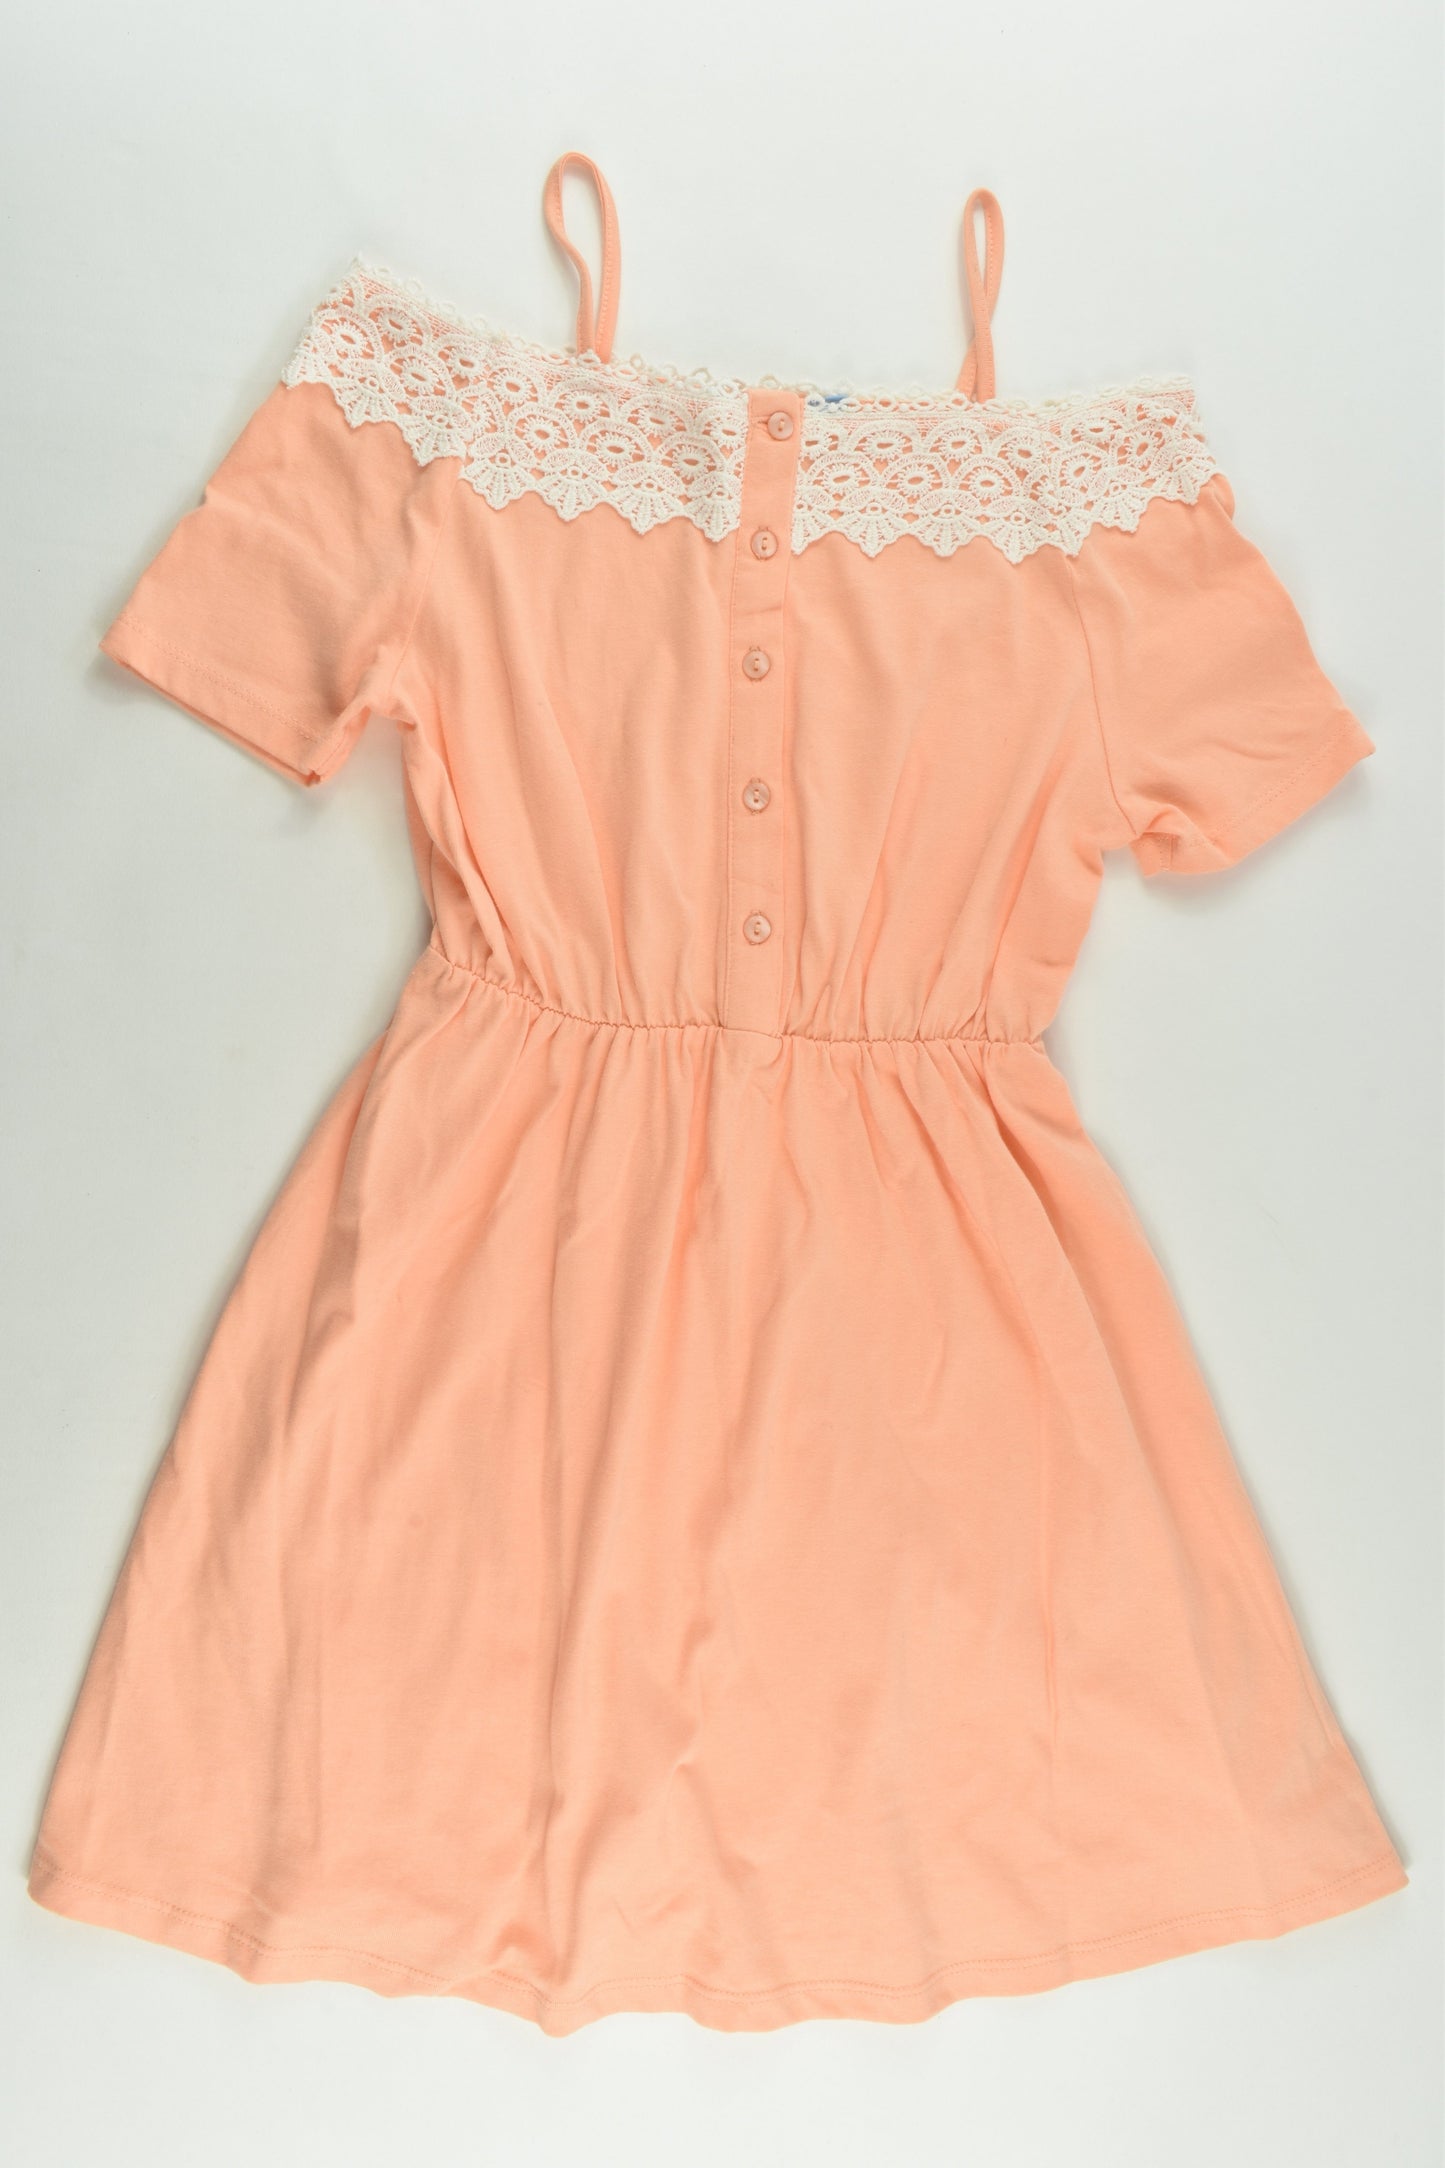 NEW Tilii Size 8 Dress with Lace Detail